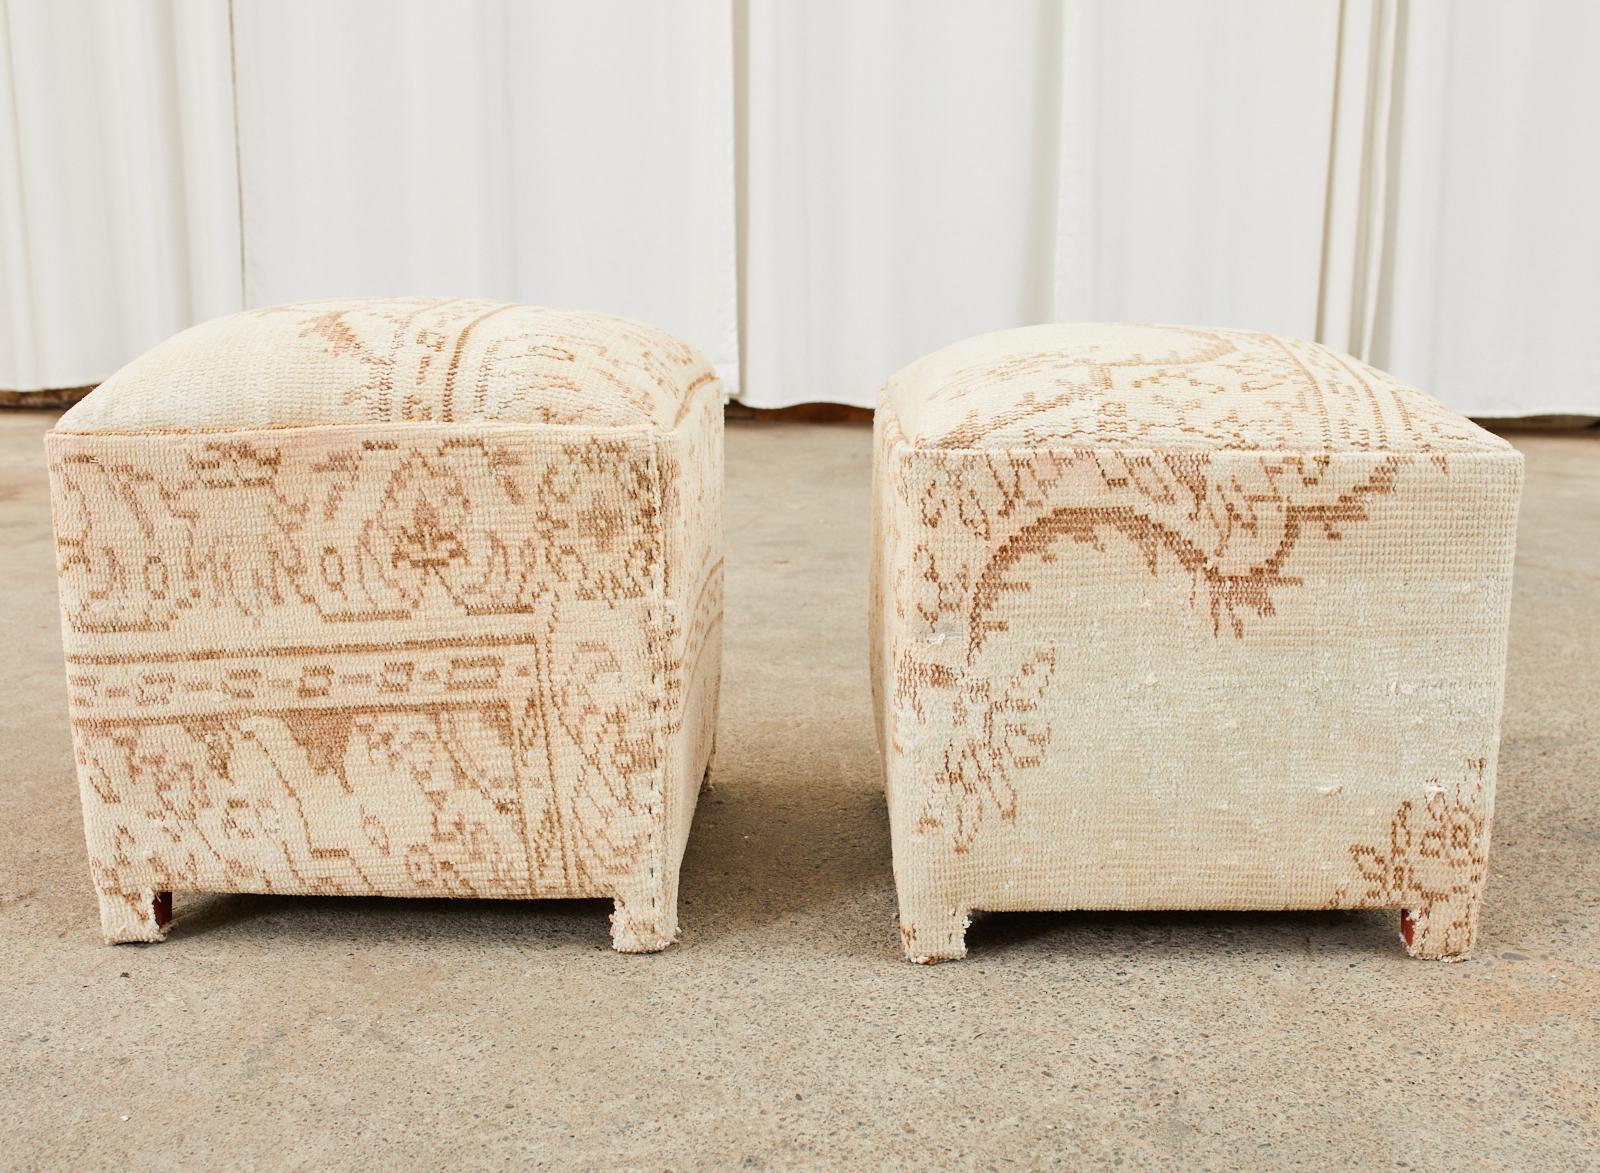 Rustic pair of footstools, ottomans, or poufs featuring a Turkish Kilim style rug upholstery. The square cube forms have a padded, domed top and showcase the aged and distressed patina of the rugs. Supported on each corner with short square feet.